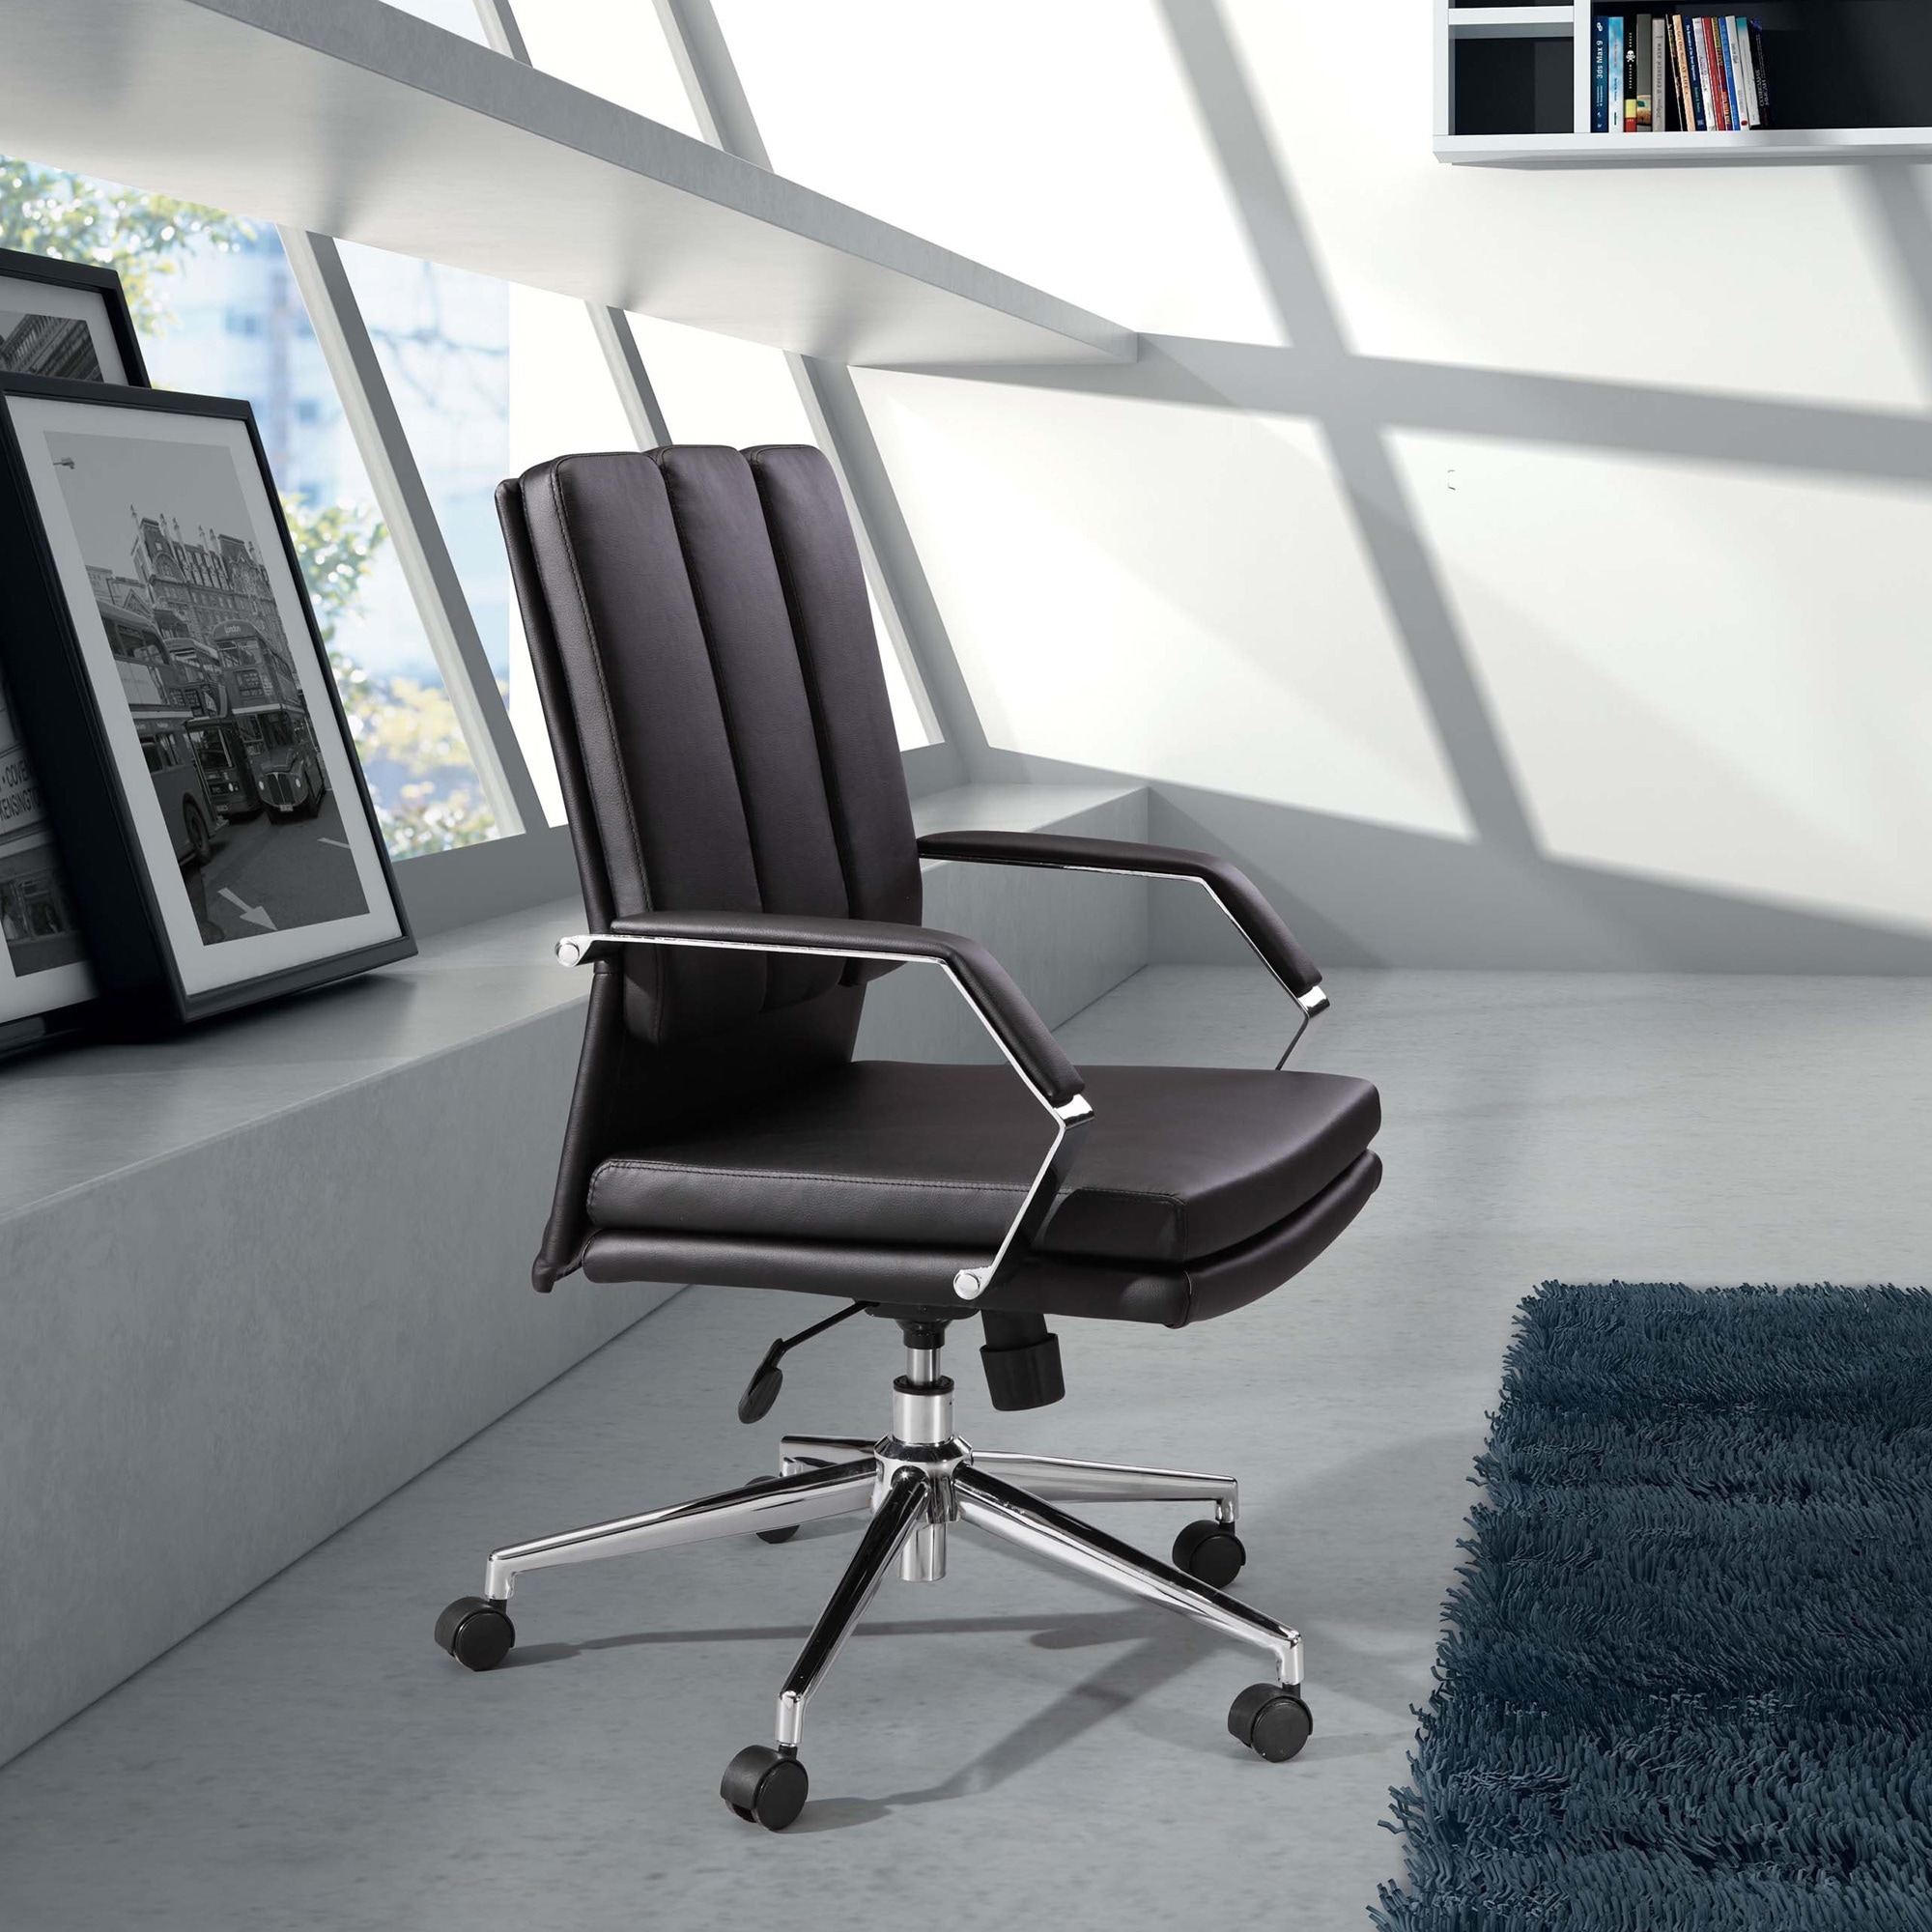 Director Pro White Office Chair (WhiteMaterials Chromed steel, leatheretteFinish LeatheretteSeat height 18.9 to 21.7 inches high Adjustable height YesWheels YesDimensions 38 to 40.9 inches high x 27.5 inches wide x 27.5 inches deepSeat Dimensions 1